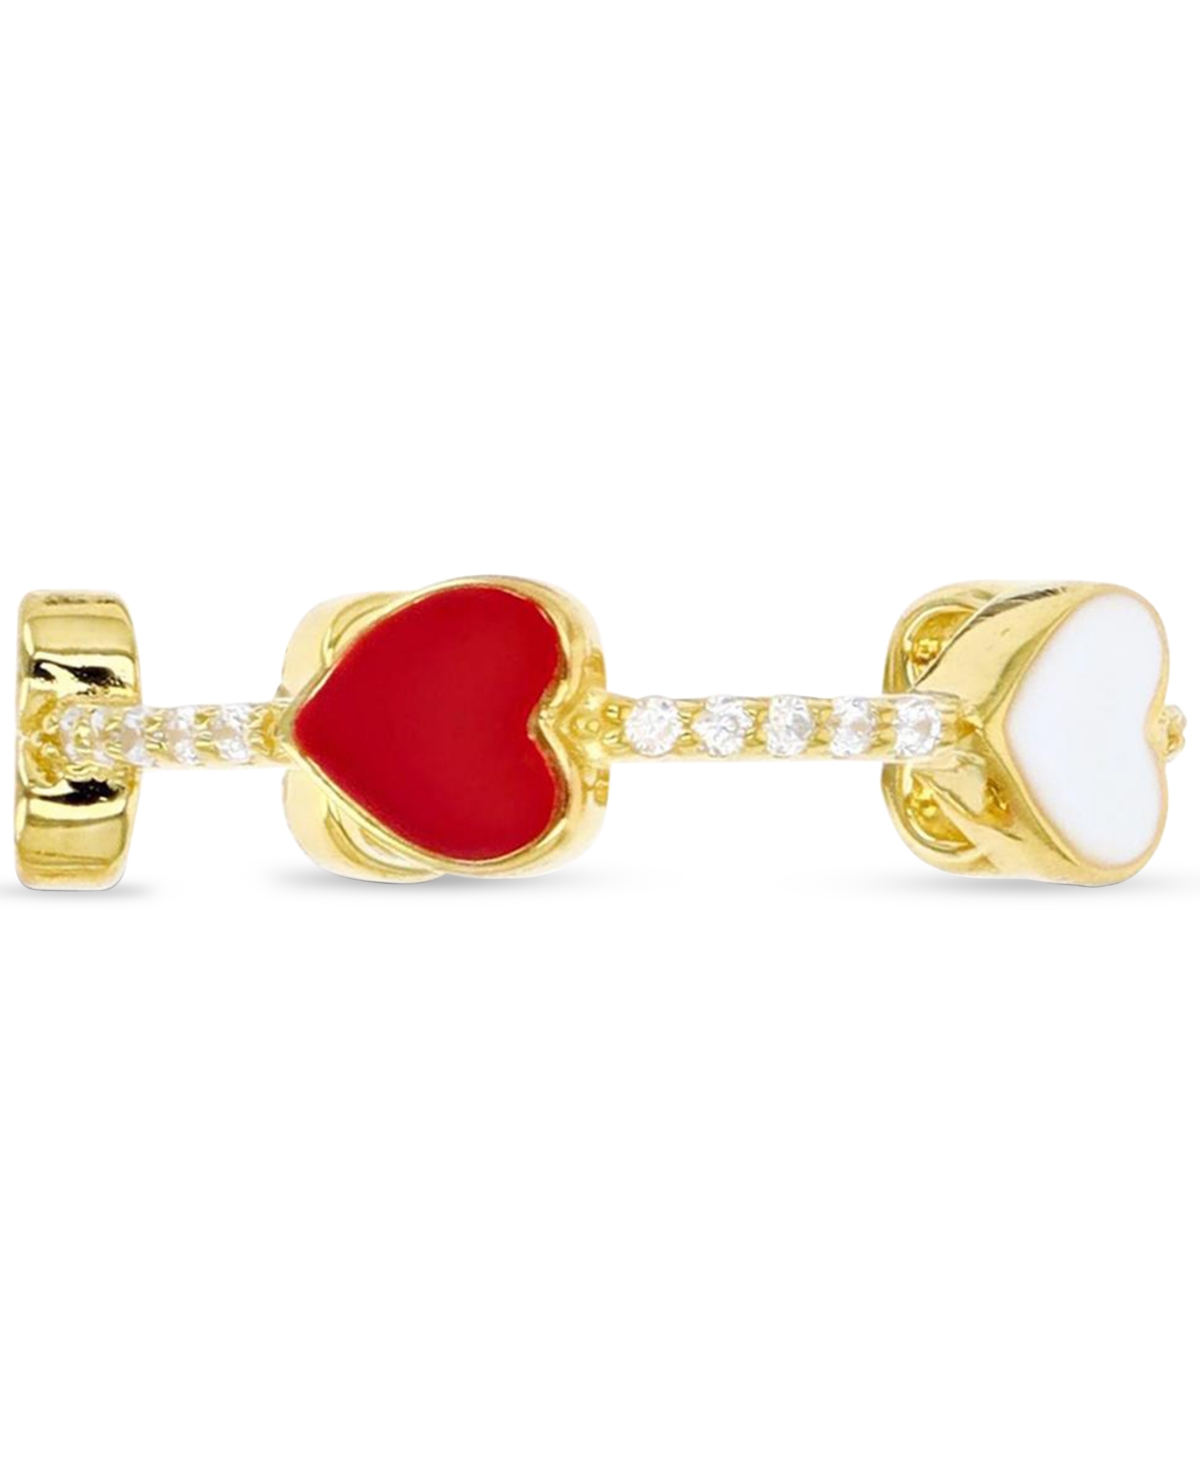 Cubic Zirconia & Red & White Enamel Polished Heart Ring in 14k Gold-Plated Sterling Silver - Red  White